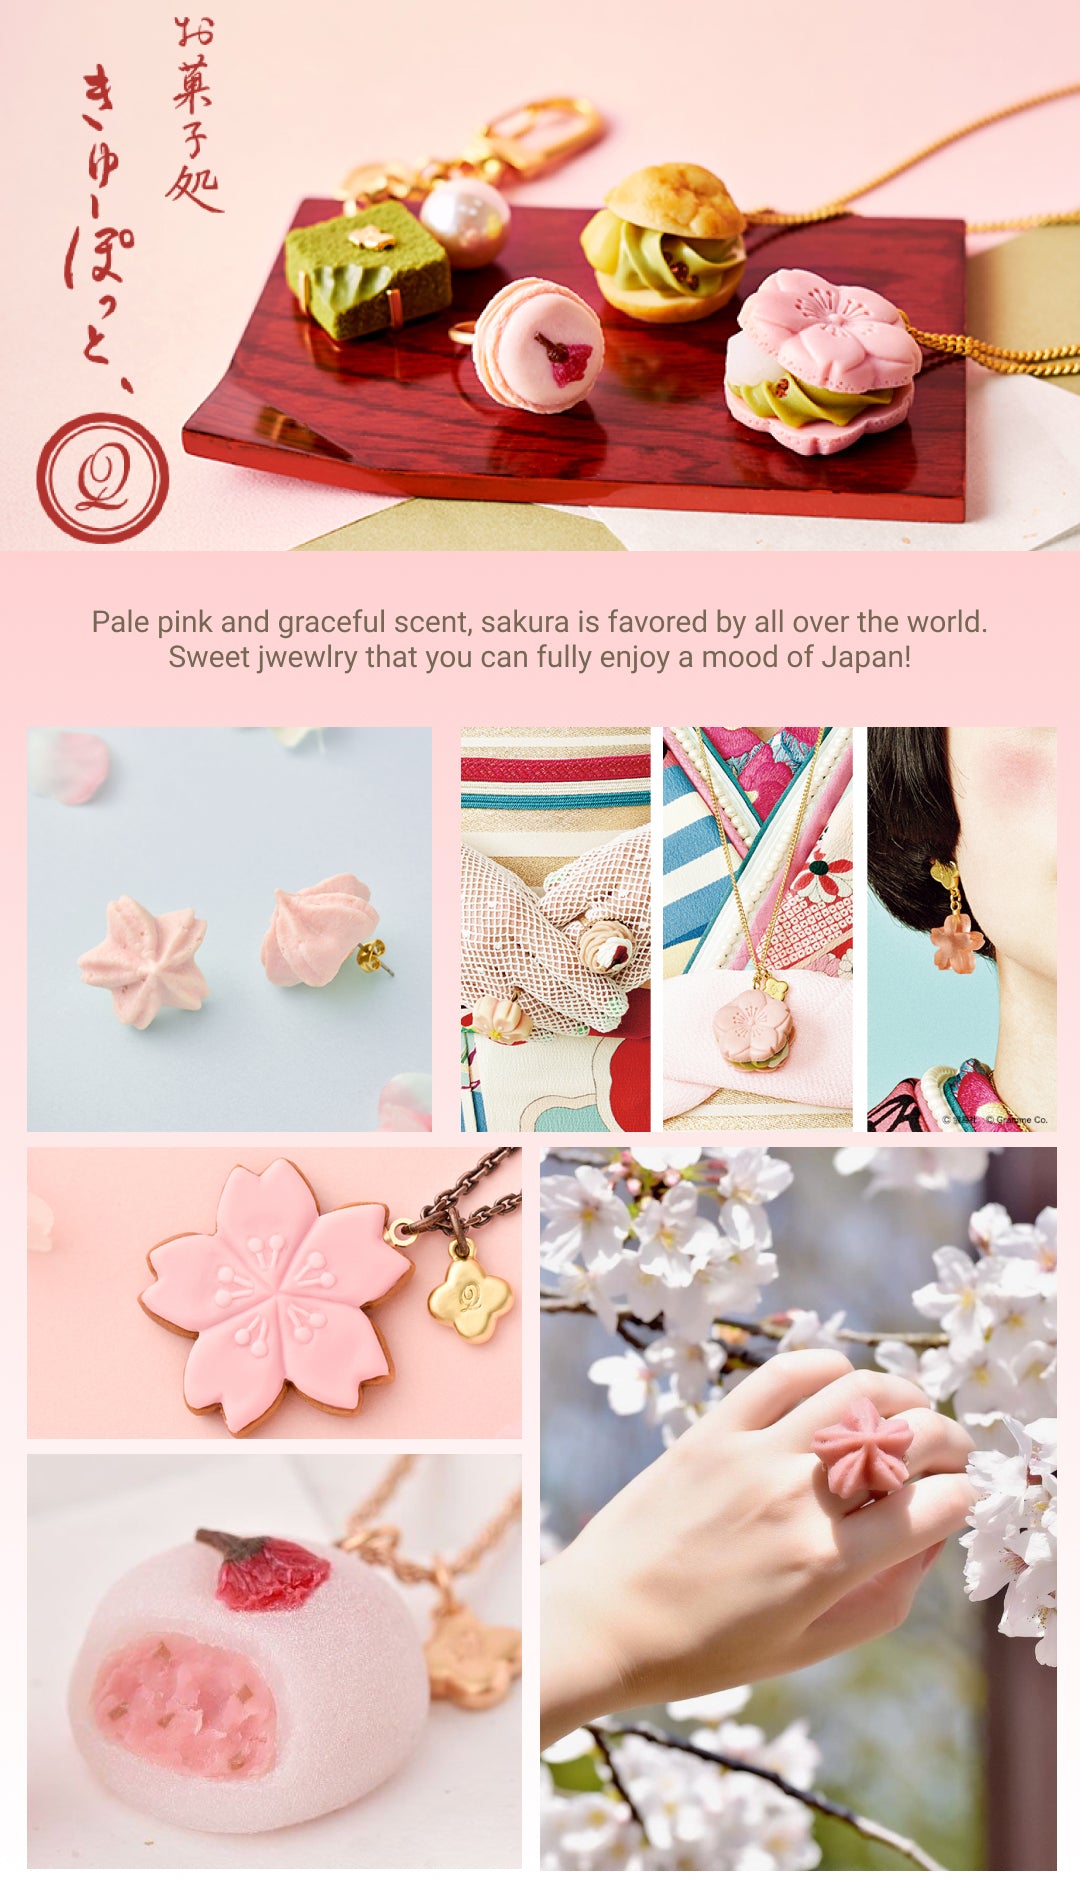 Sakura - Q-pot. is the first sweets Japan Jewelry brand.